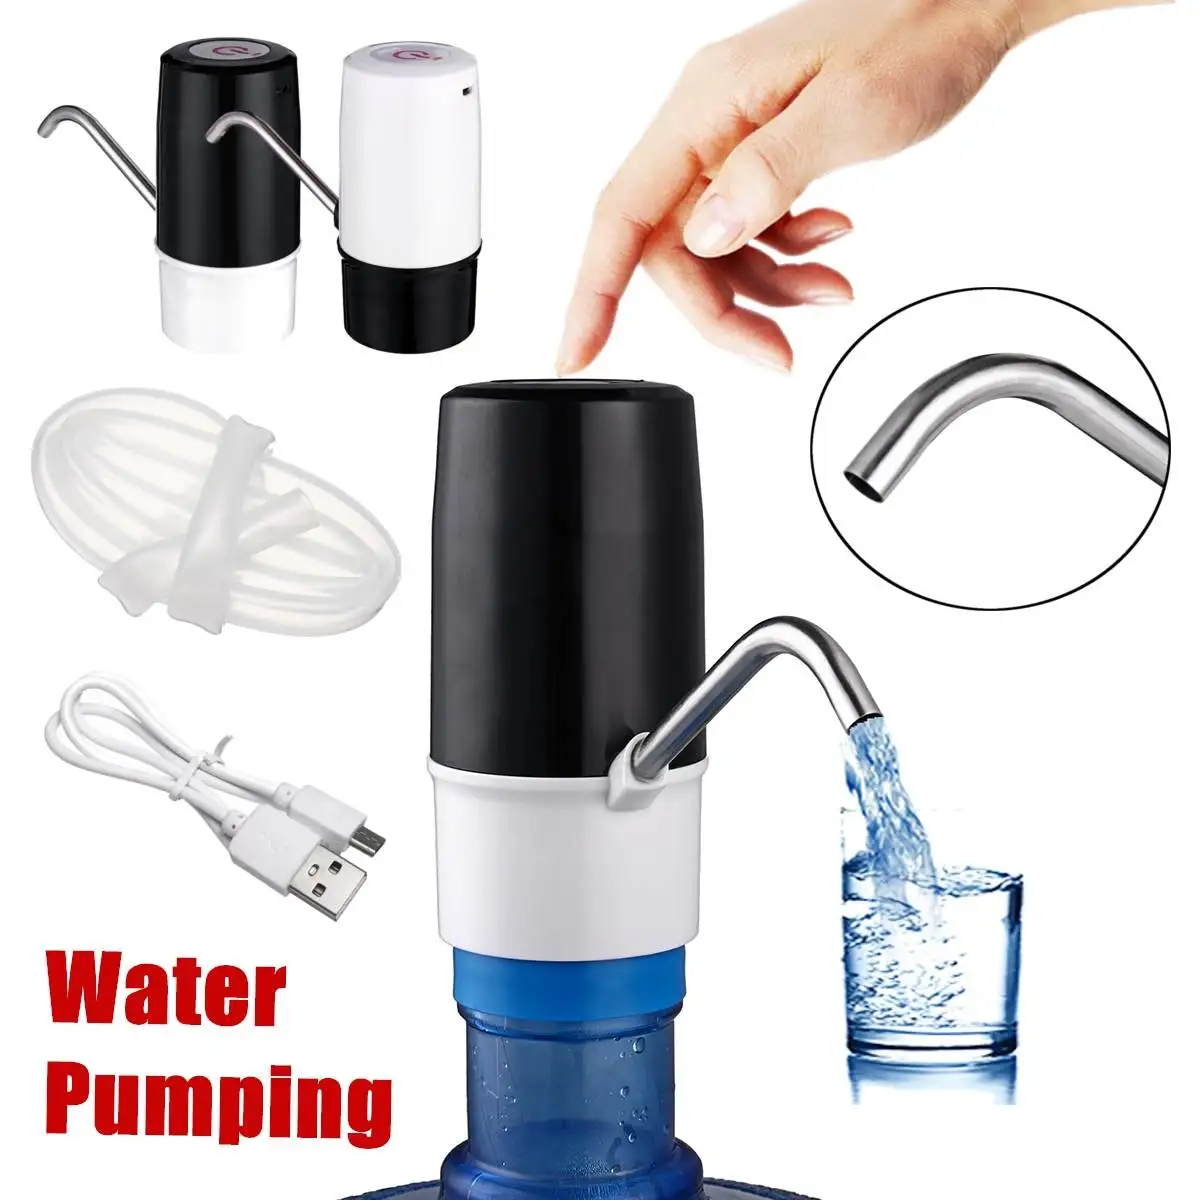 

Automatic Electric Water Drinking Gallon Bottle Pump Water Dispenser Portable Water Pumping Device Appliances USB Rechargeable